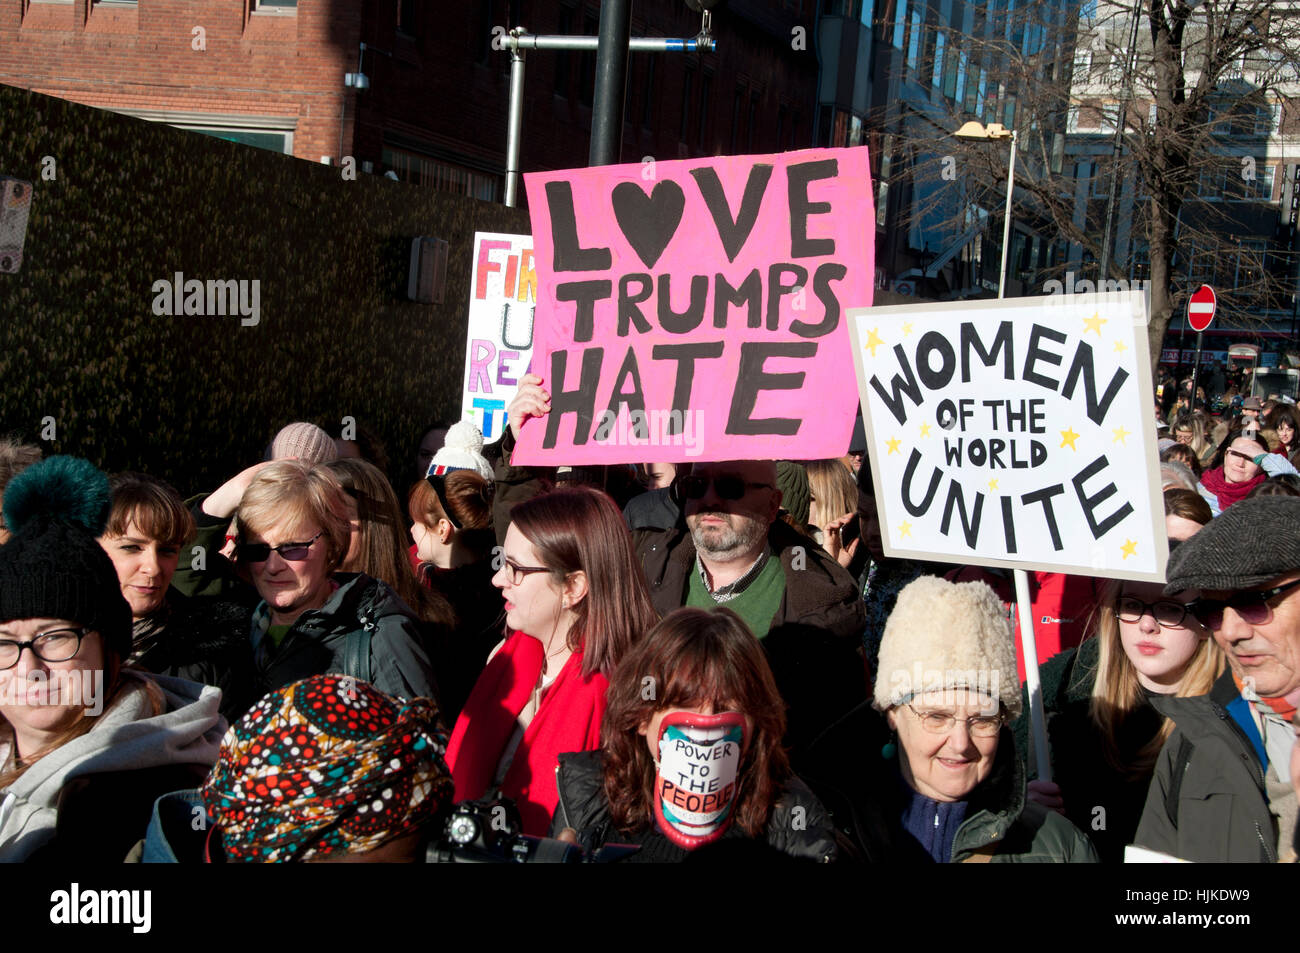 Women's anti-Trump march, London. Placards saying 'Love trumps hate' and 'Women of the world unite'. Stock Photo